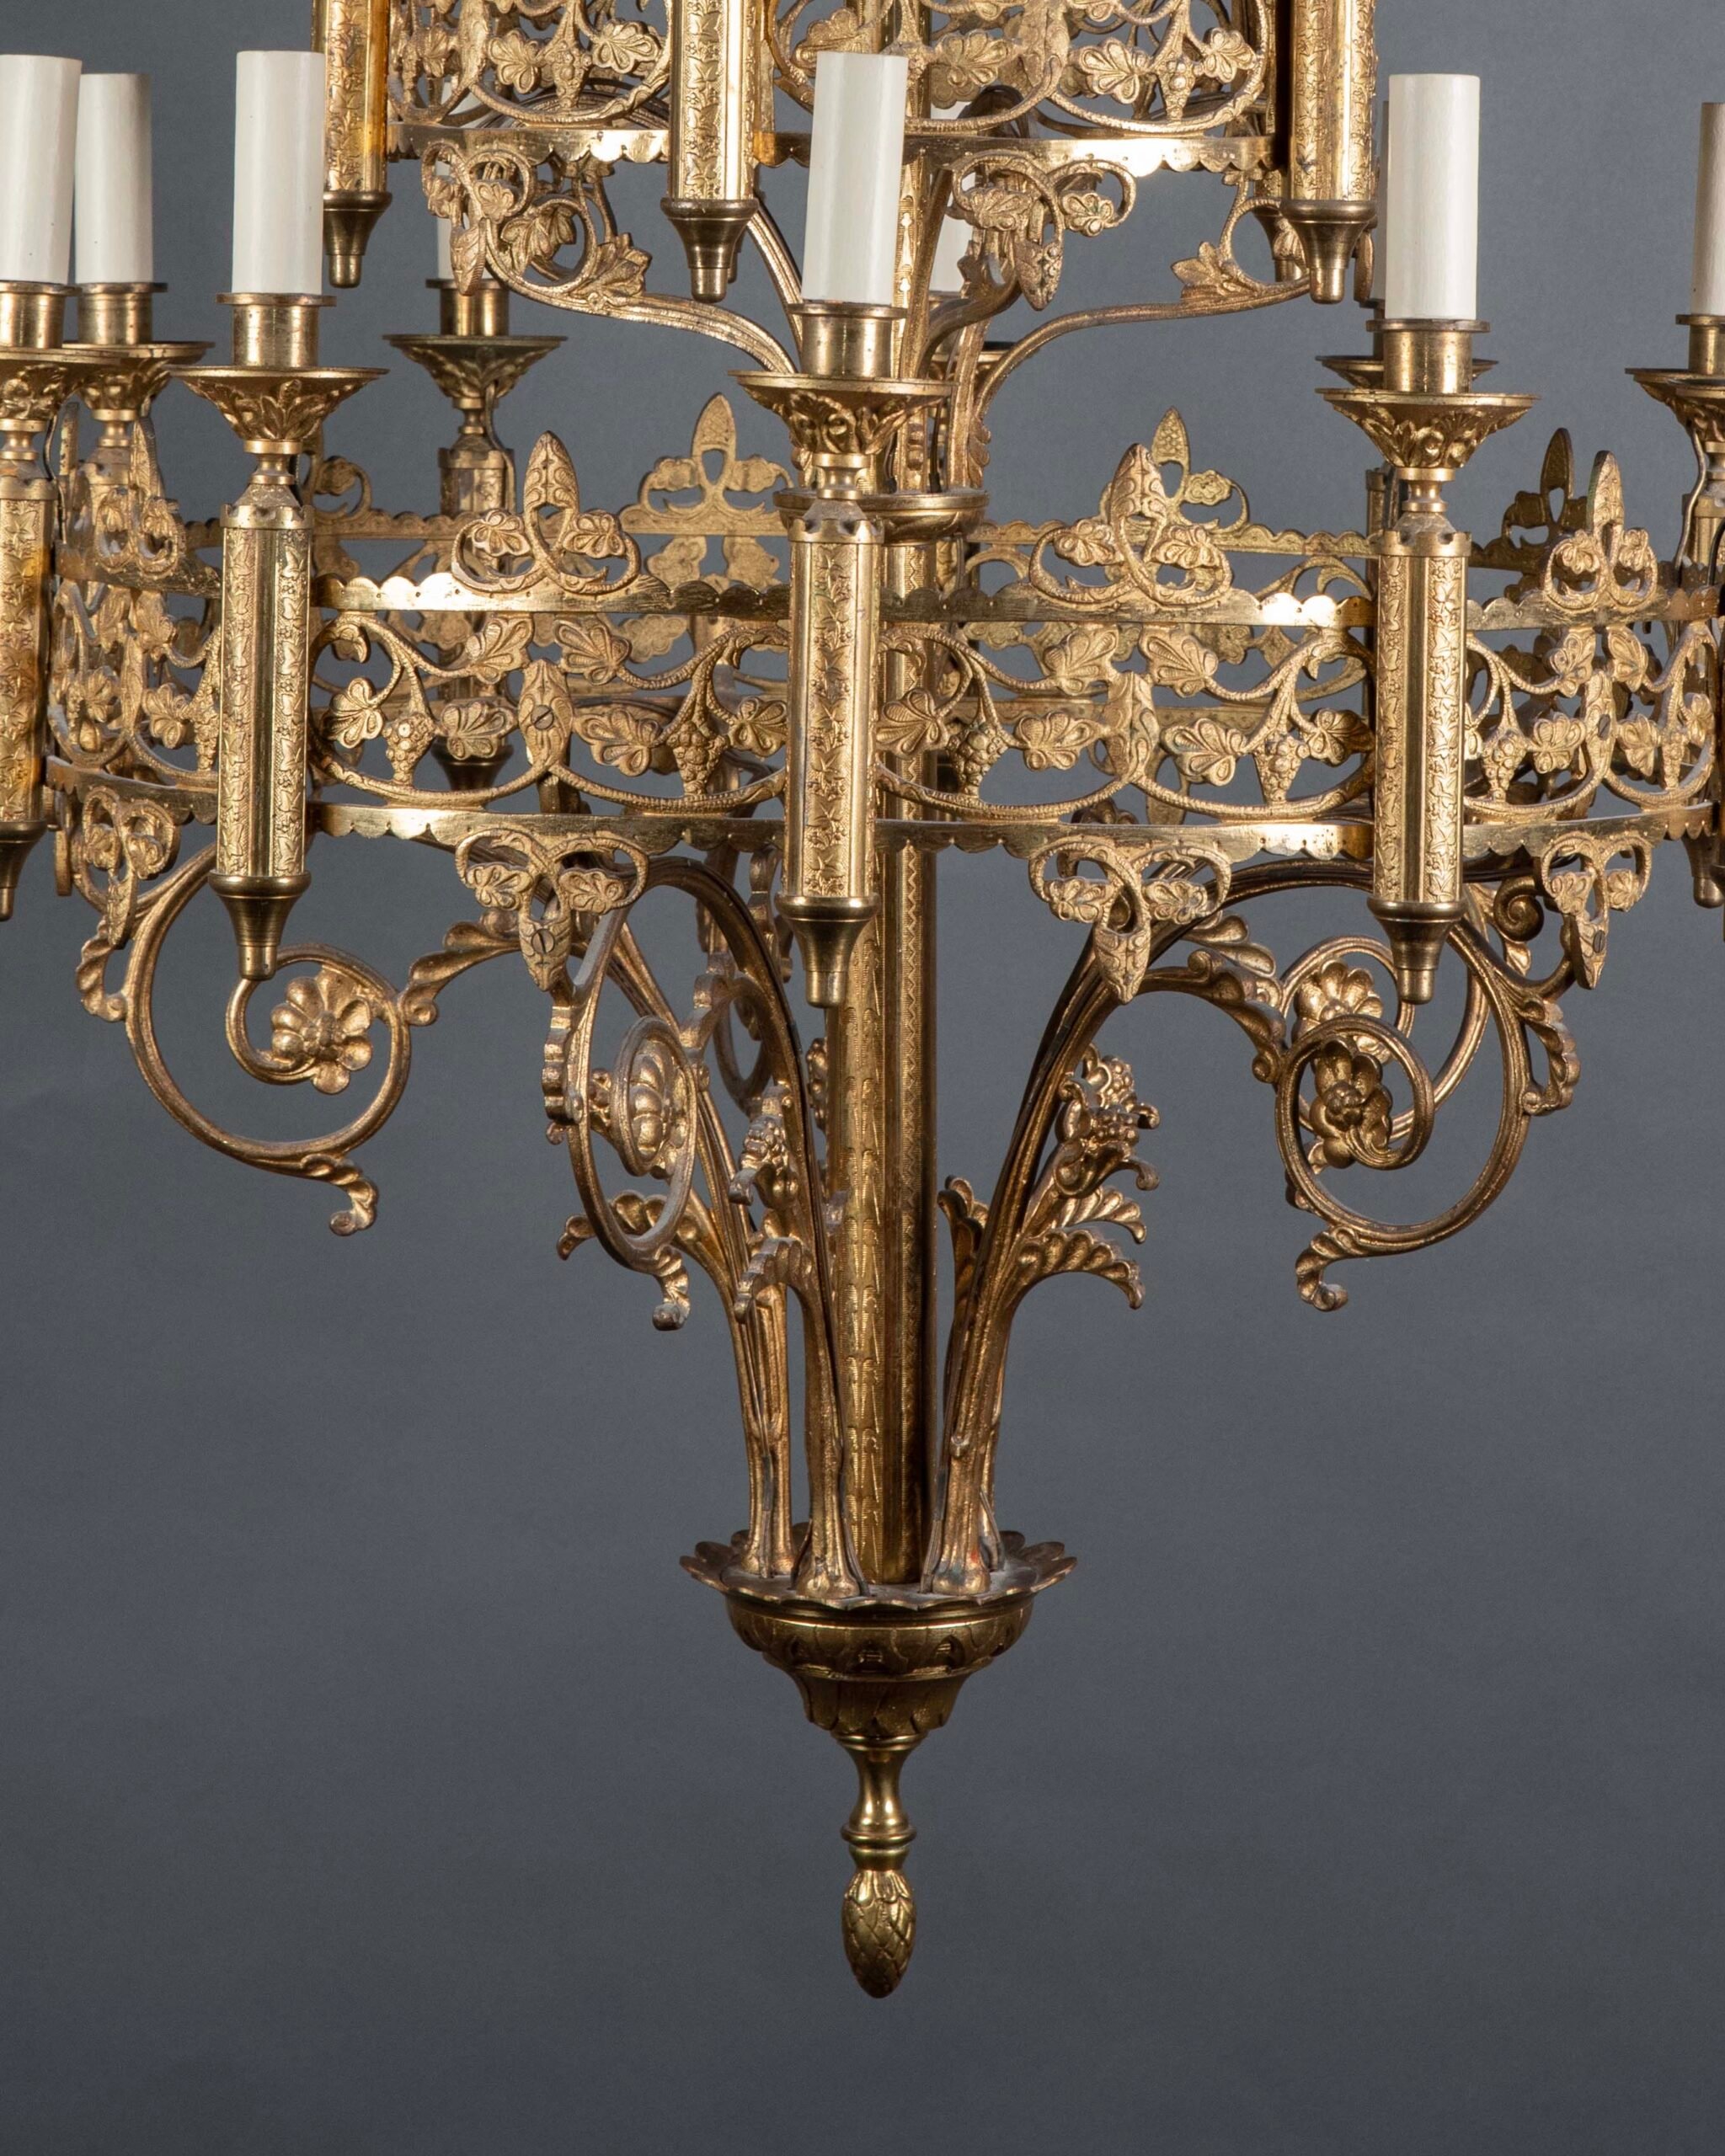 Bottom detail section from a pair of gothic chandeliers